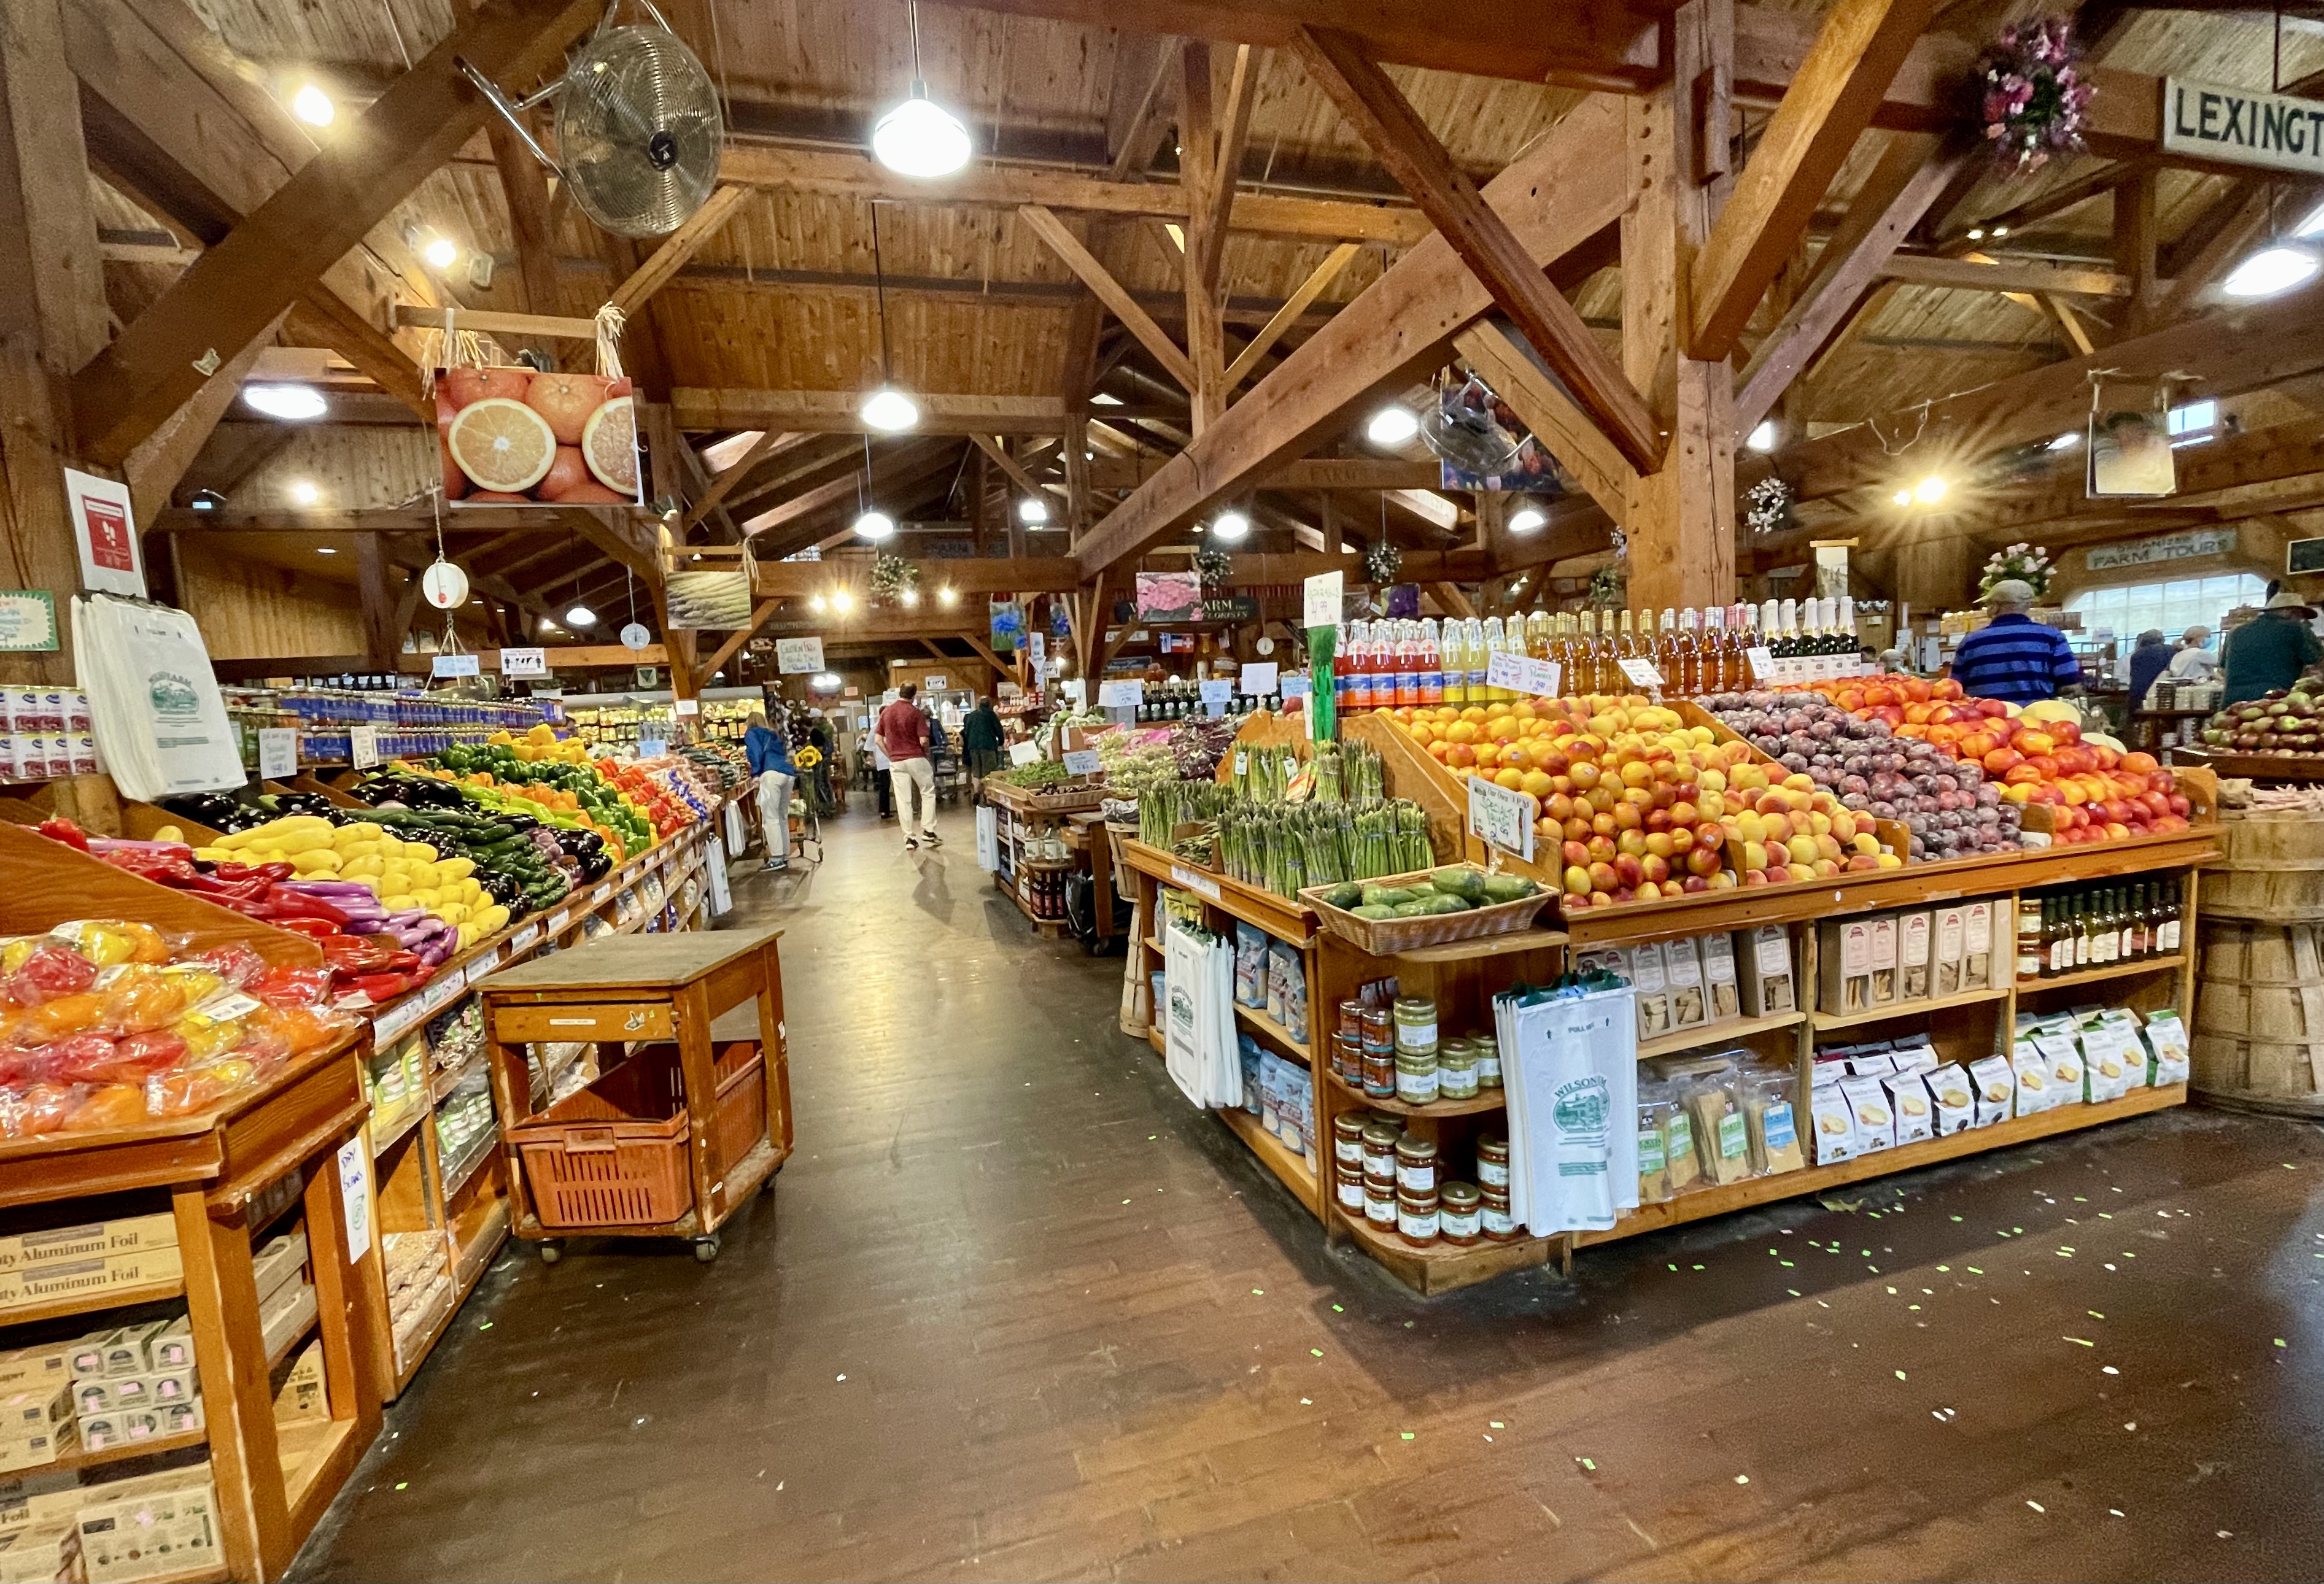 Wilson Farm in Lexington has a style similar to Russo’s in Watertown: Large wooden bins of ample produce and, underneath, densely packed display shelves. The farm stand building offers imported and domestic cheese, seafood, butcher meat cuts, and prepared food. A large parking lot is on site.